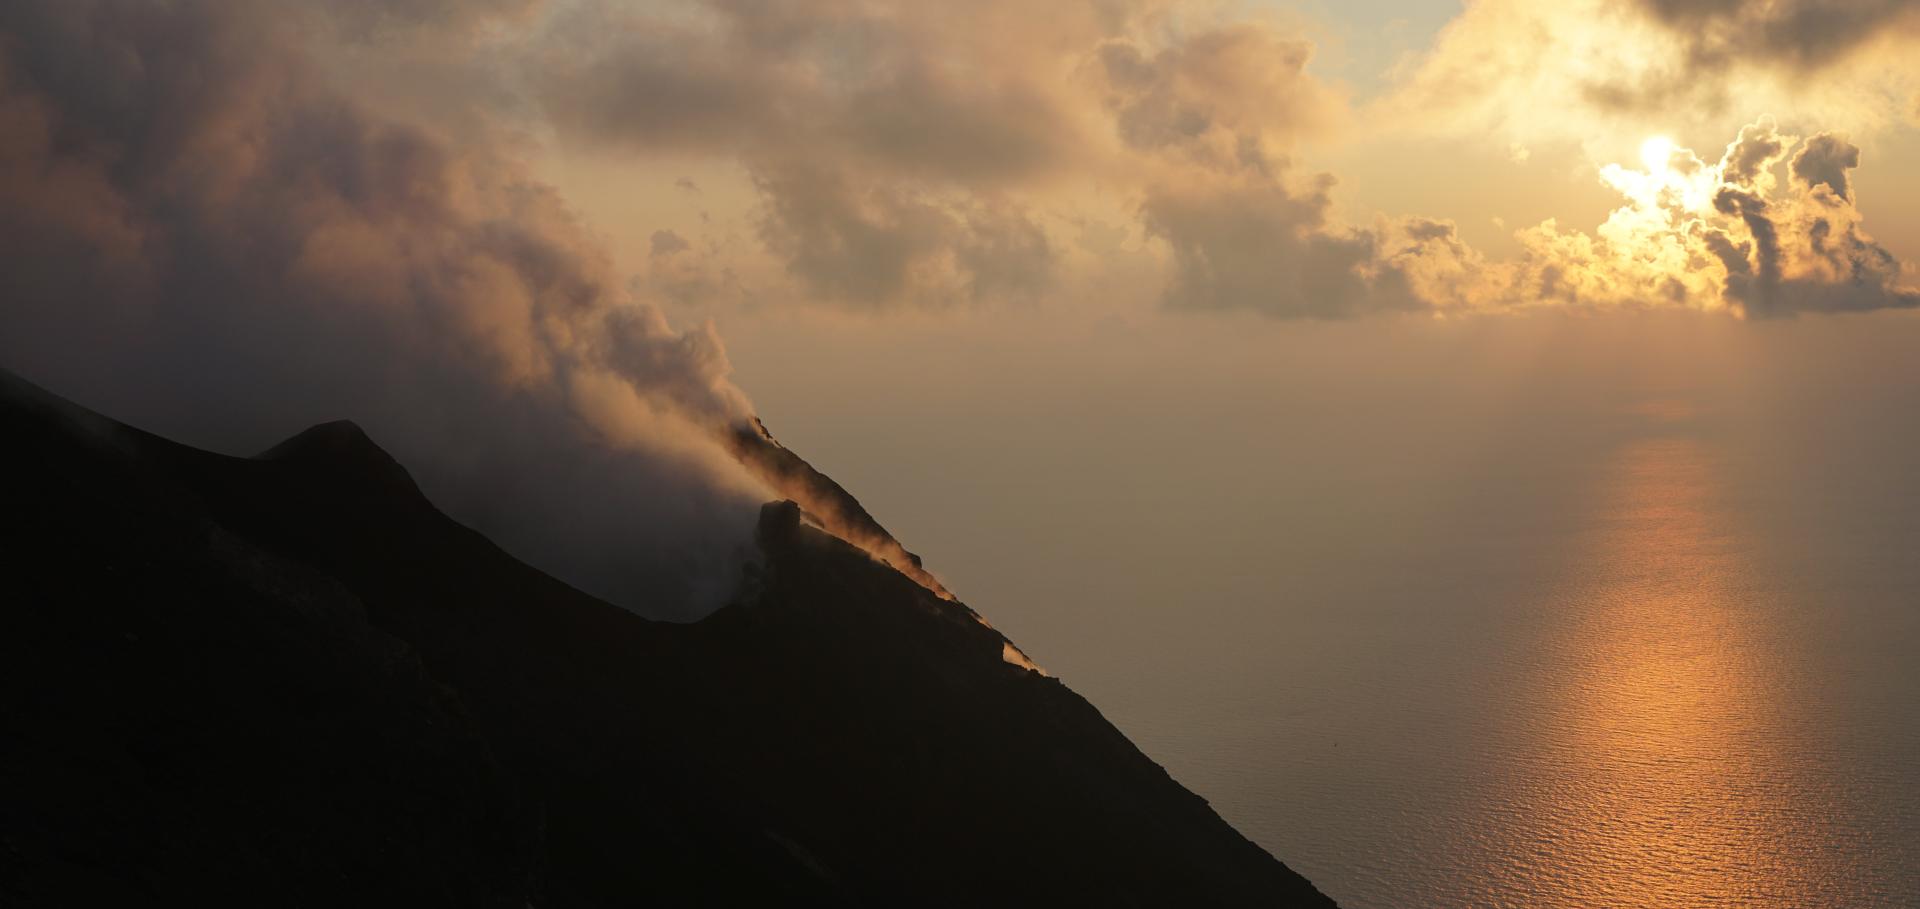 Volcano with sunset in background, over ocean.